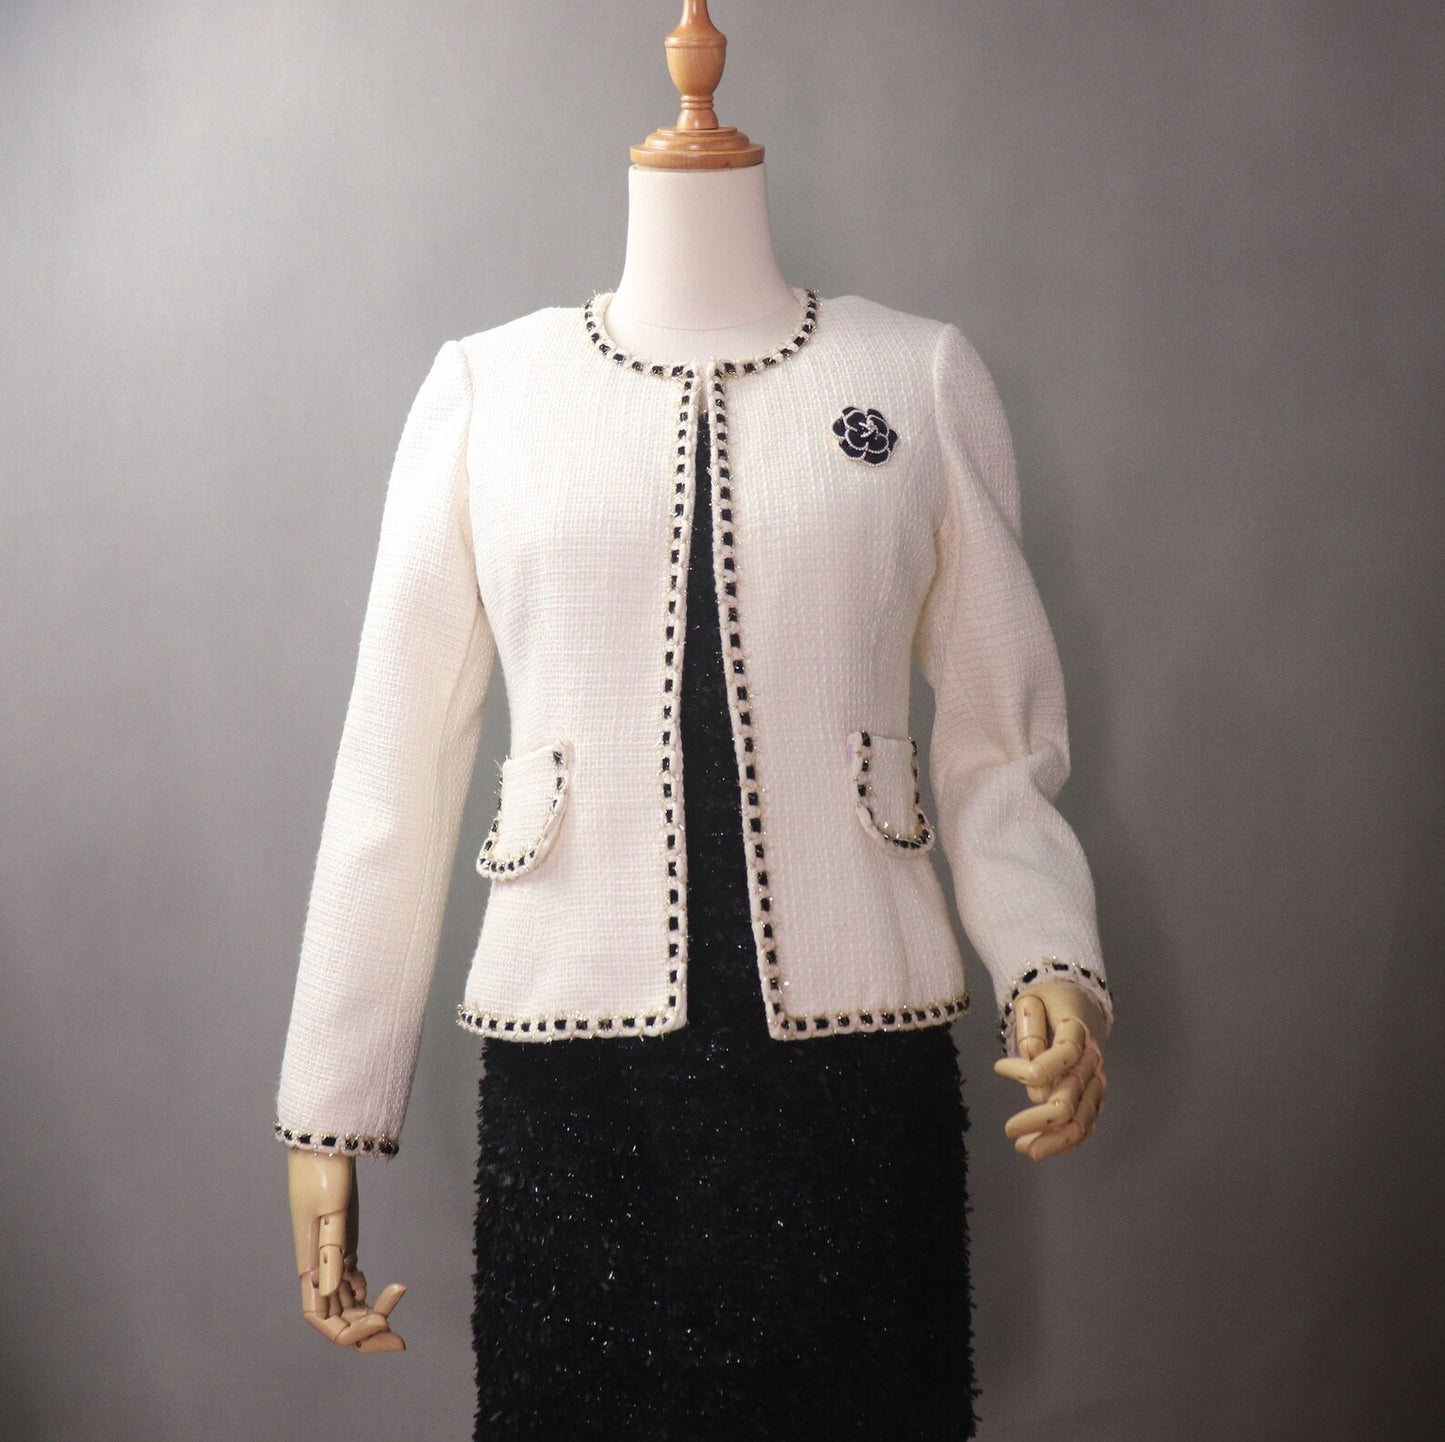 Women's CUSTOM MADE White Tweed Coat Blazer  UK CUSTOMER SERVICE!  Coat And Sheath dress sold separately.  Women's CUSTOM MADE White Tweed Coat Blazer - We offer Shorts, Skirts, Trousers for the suit. The coat is suits to any dress like sheath dress. Designed with rose and front pocket. Our tailor will make as per customer requirement like with pocket, sleeveless, without pocket etc.